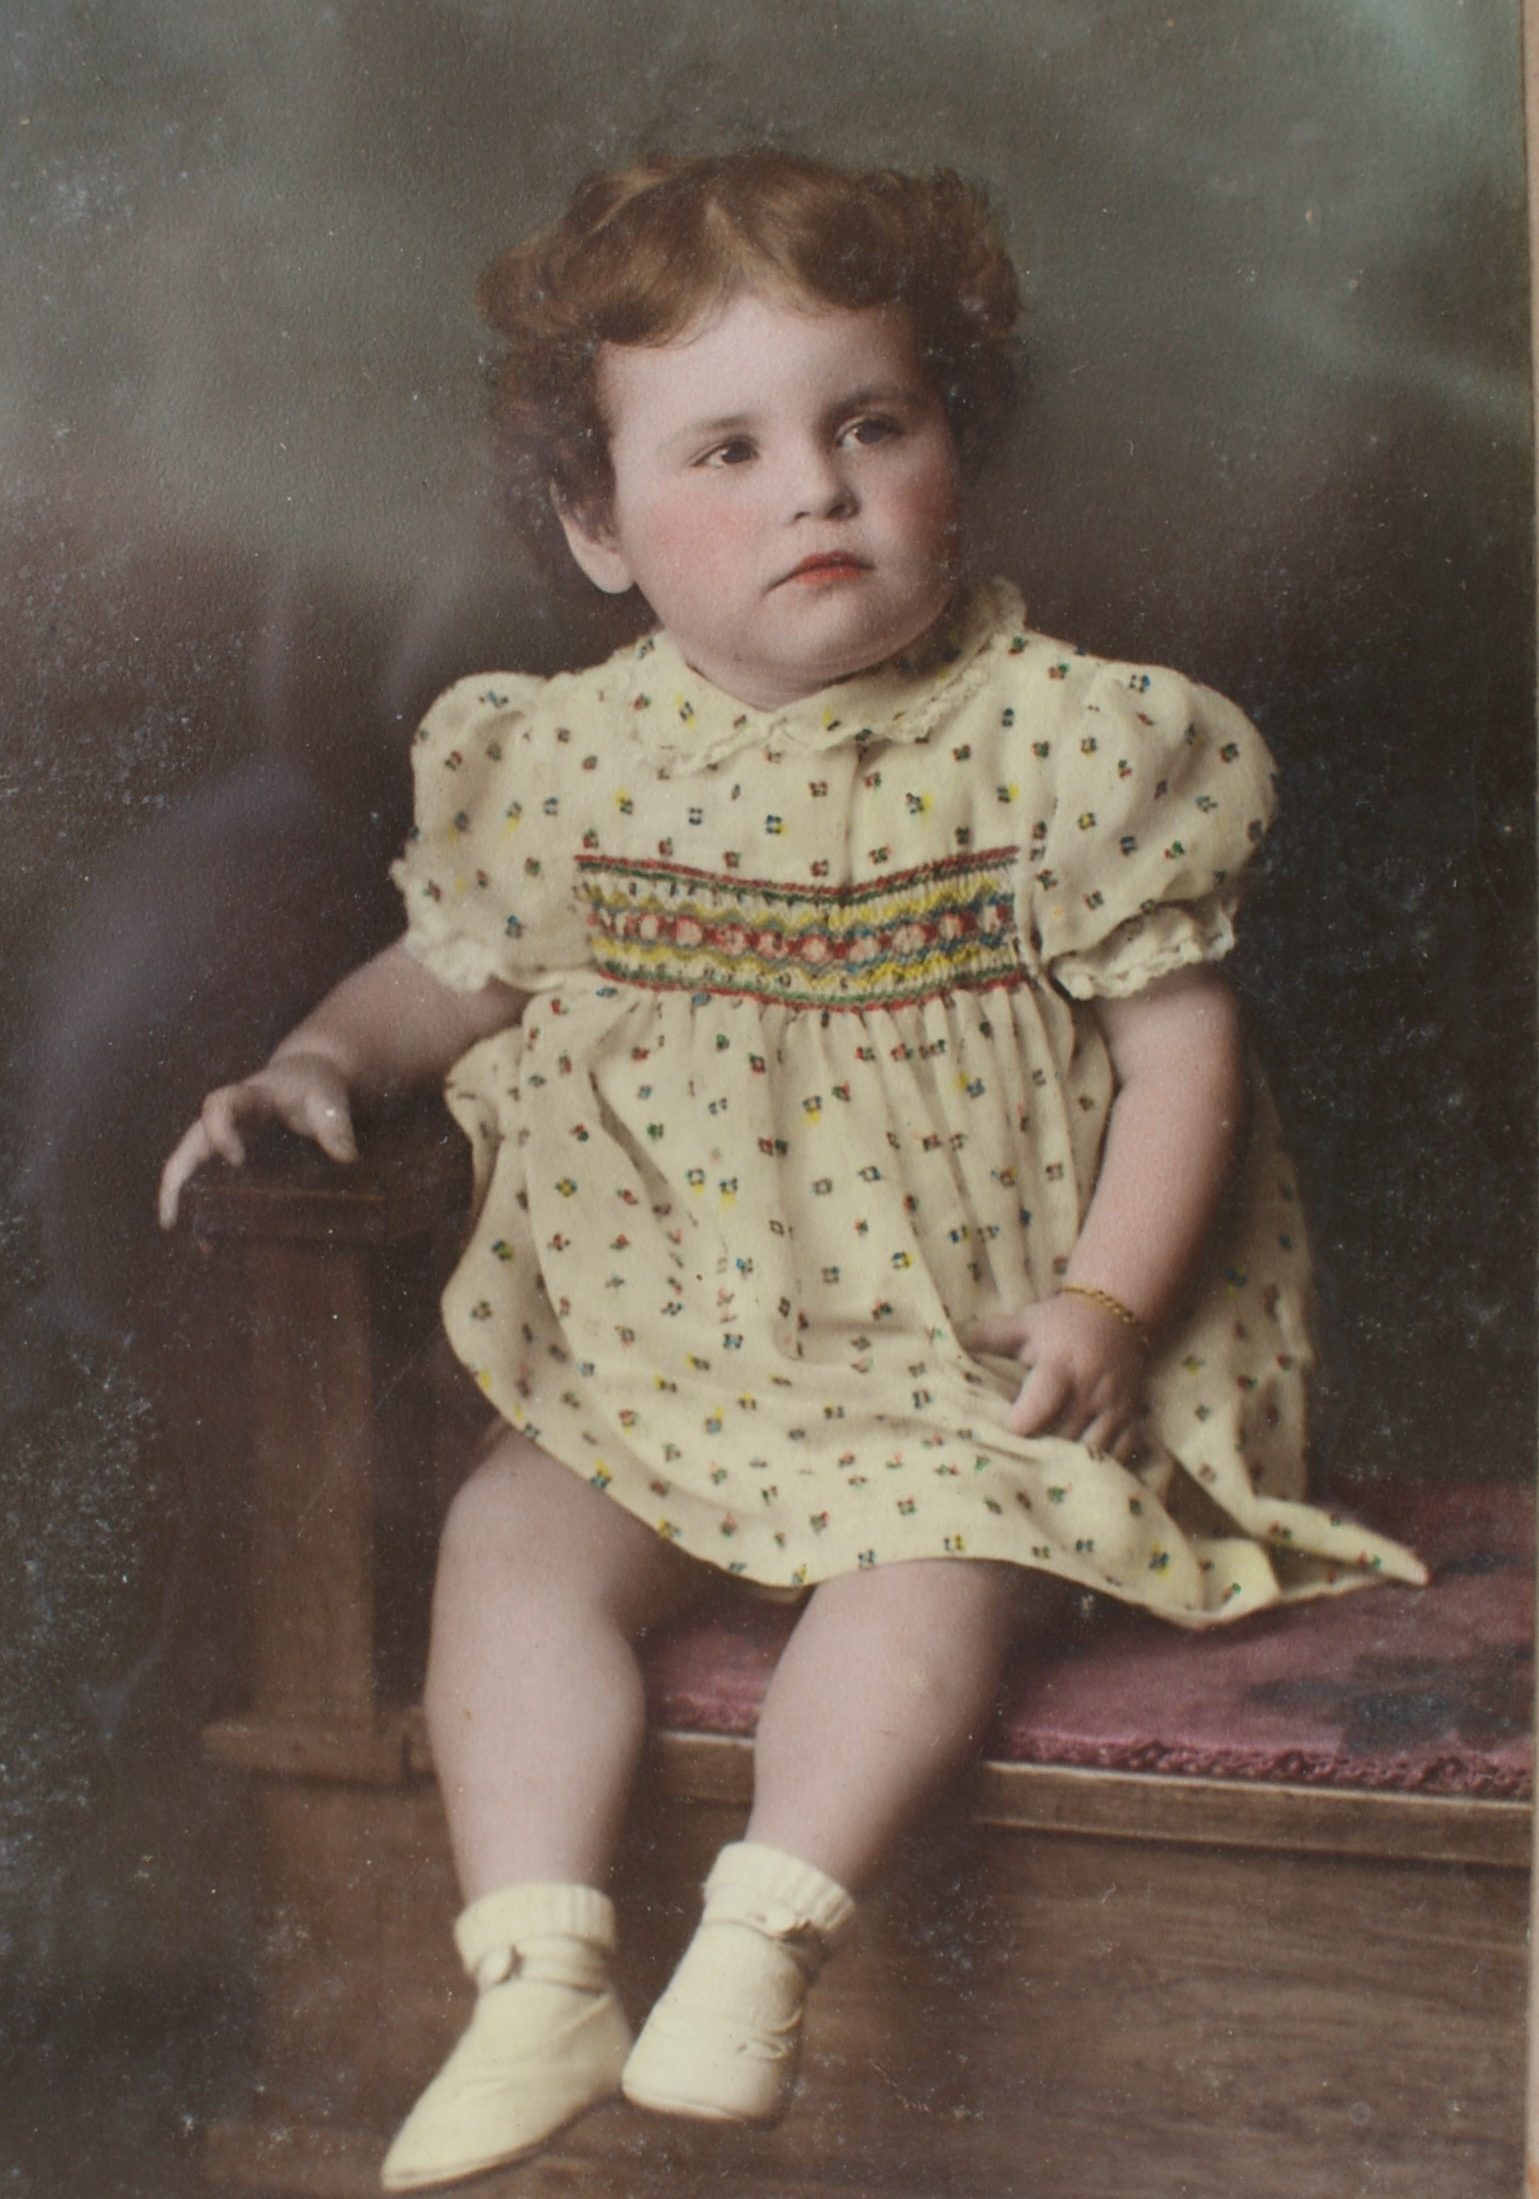 Lesley aged about 18 months seted on a stool in photographers studio. She is dressed in a smocked frock and looking off into the distance